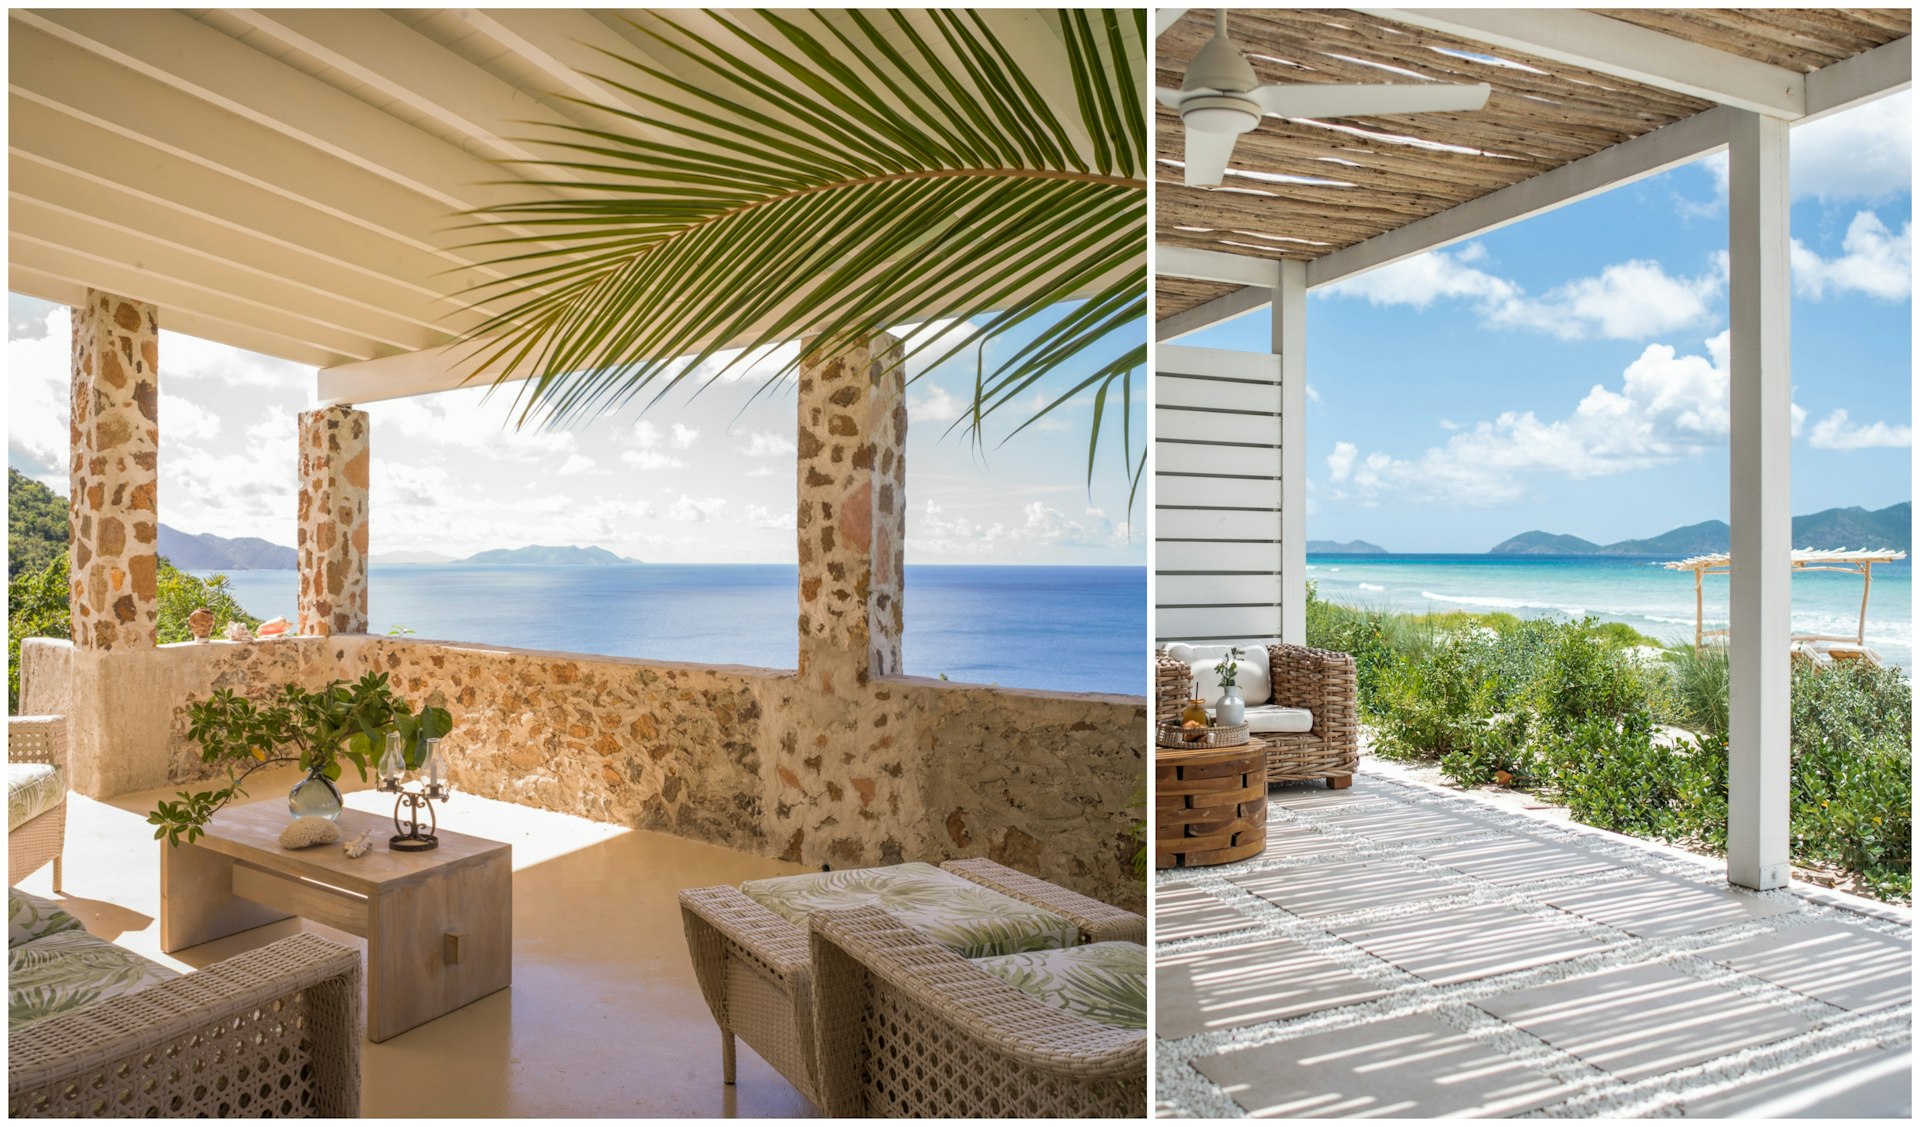 Two views of patios at tropical hotels overlooking the ocean